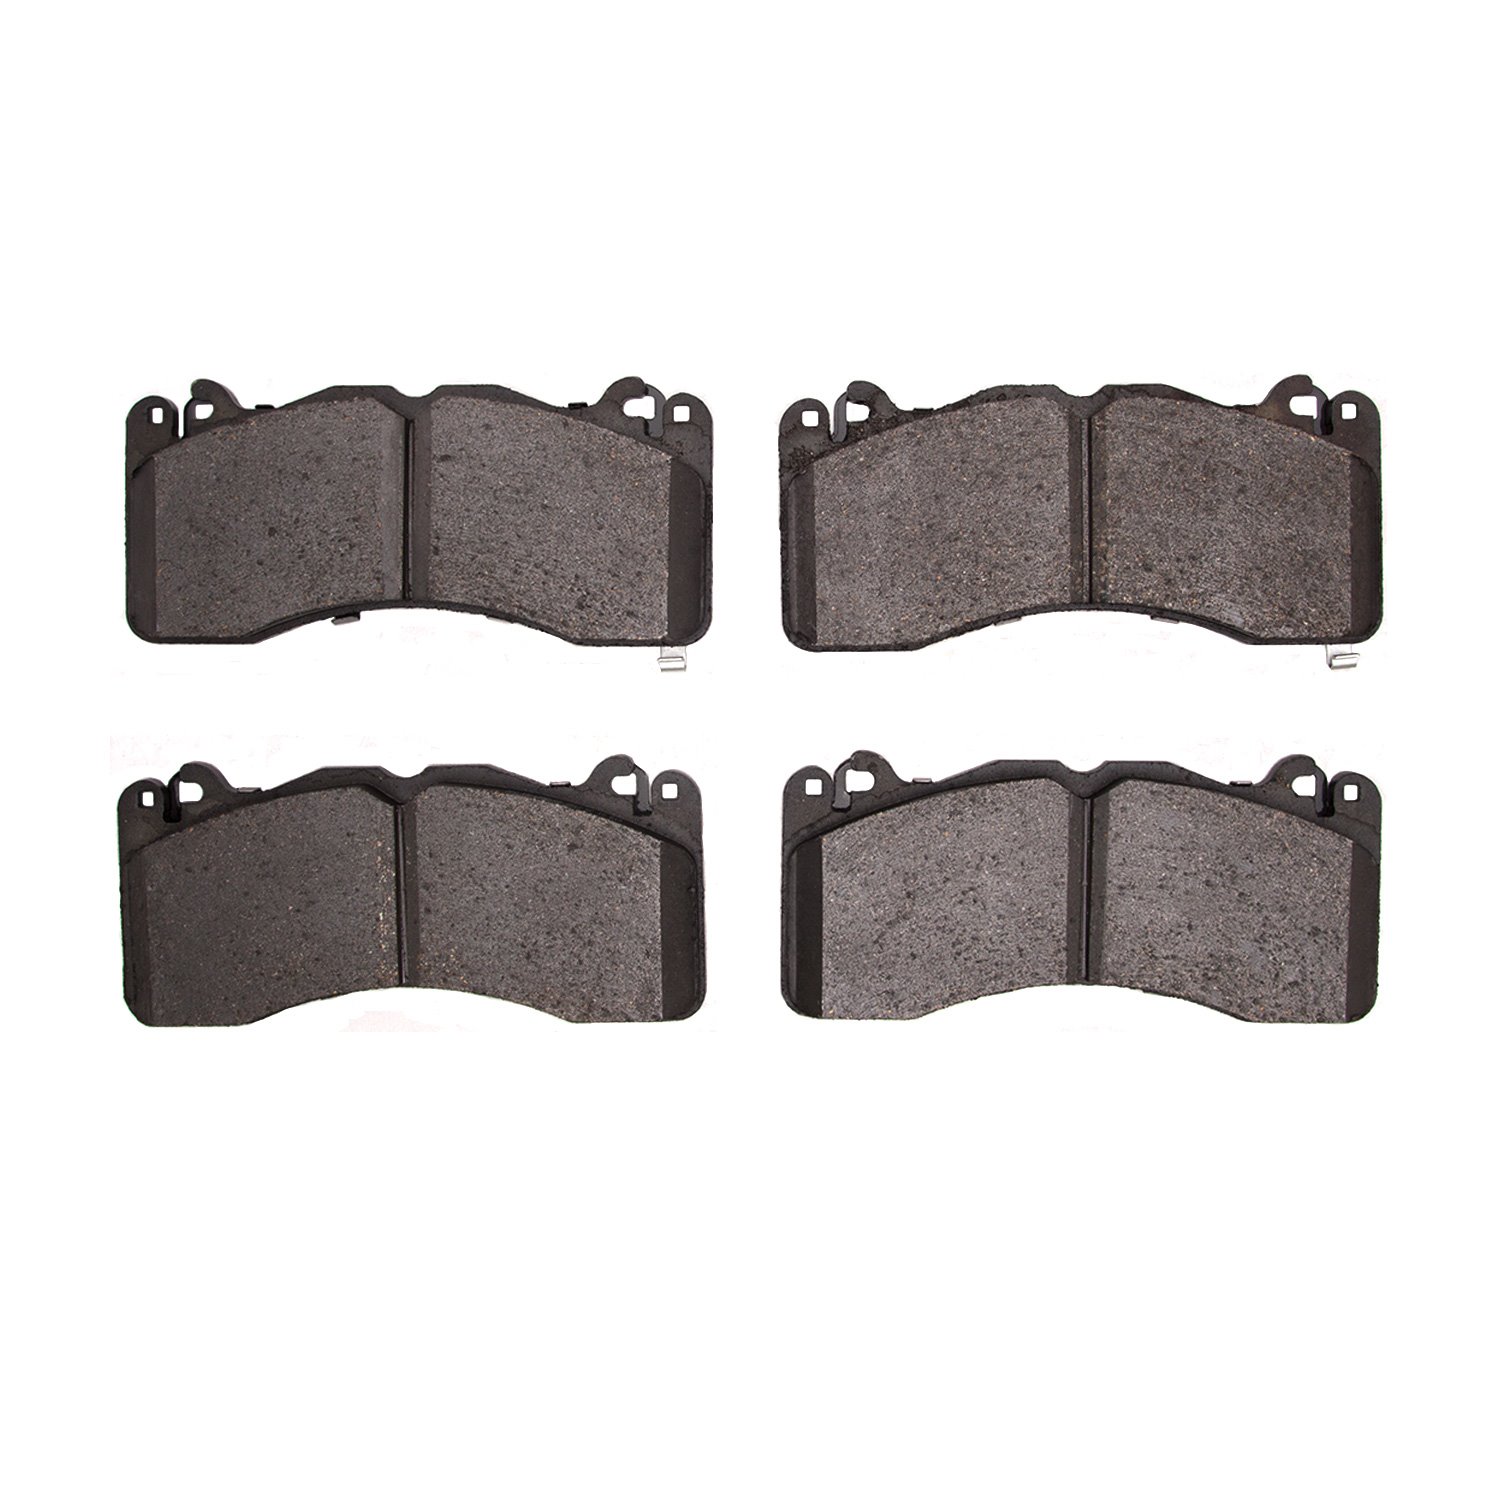 Track/Street Brake Pads, Fits Select Ford/Lincoln/Mercury/Mazda, Position: Front